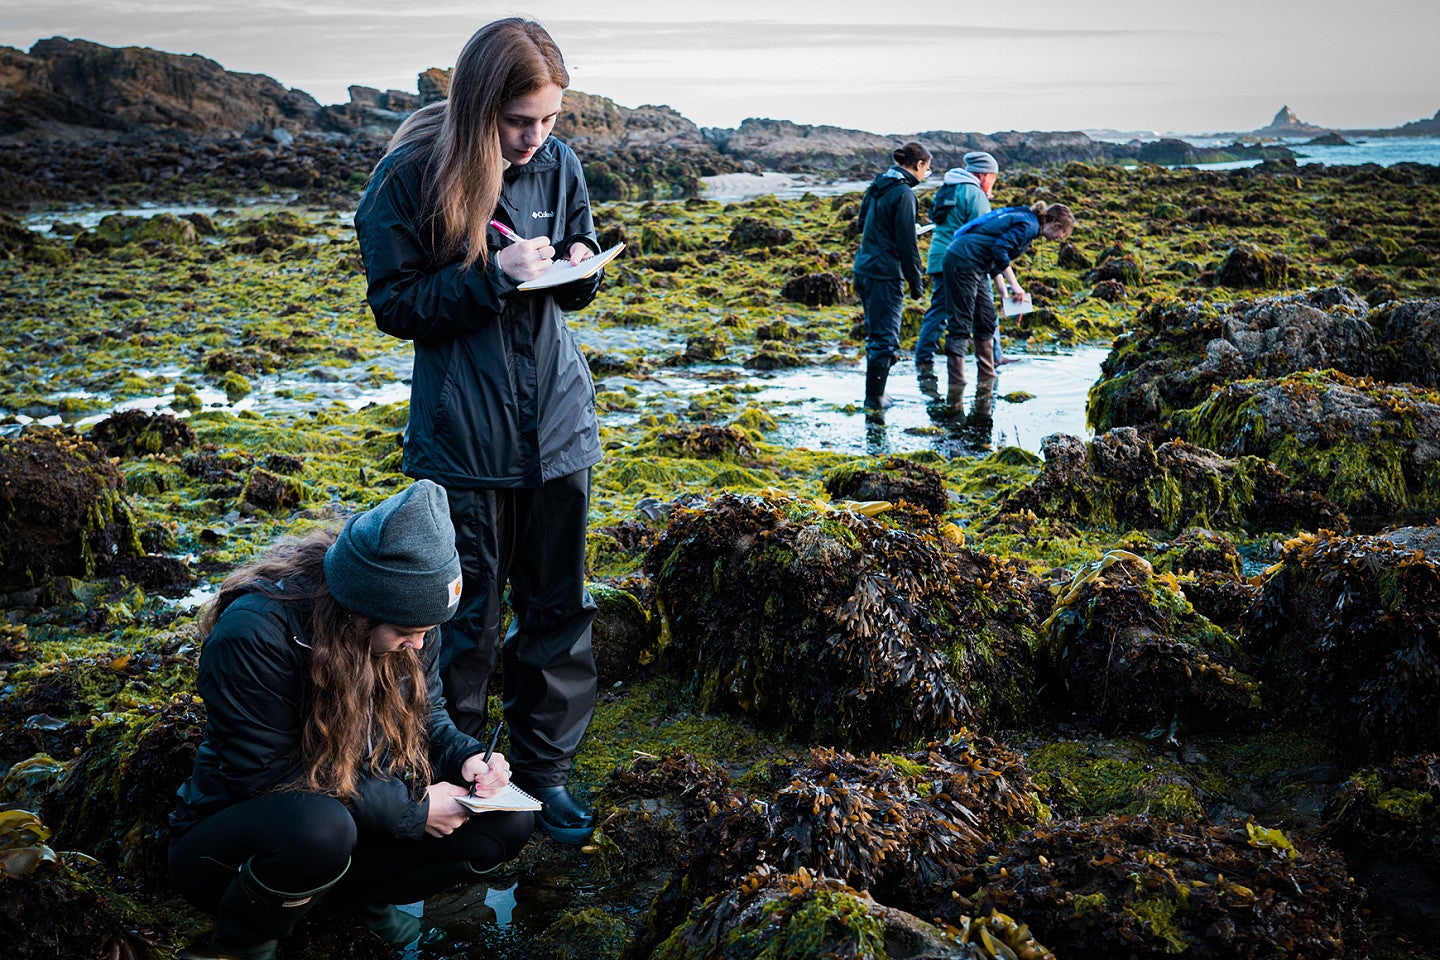 Students at the Oregon Institute of Marine Biology take notes while on the coast